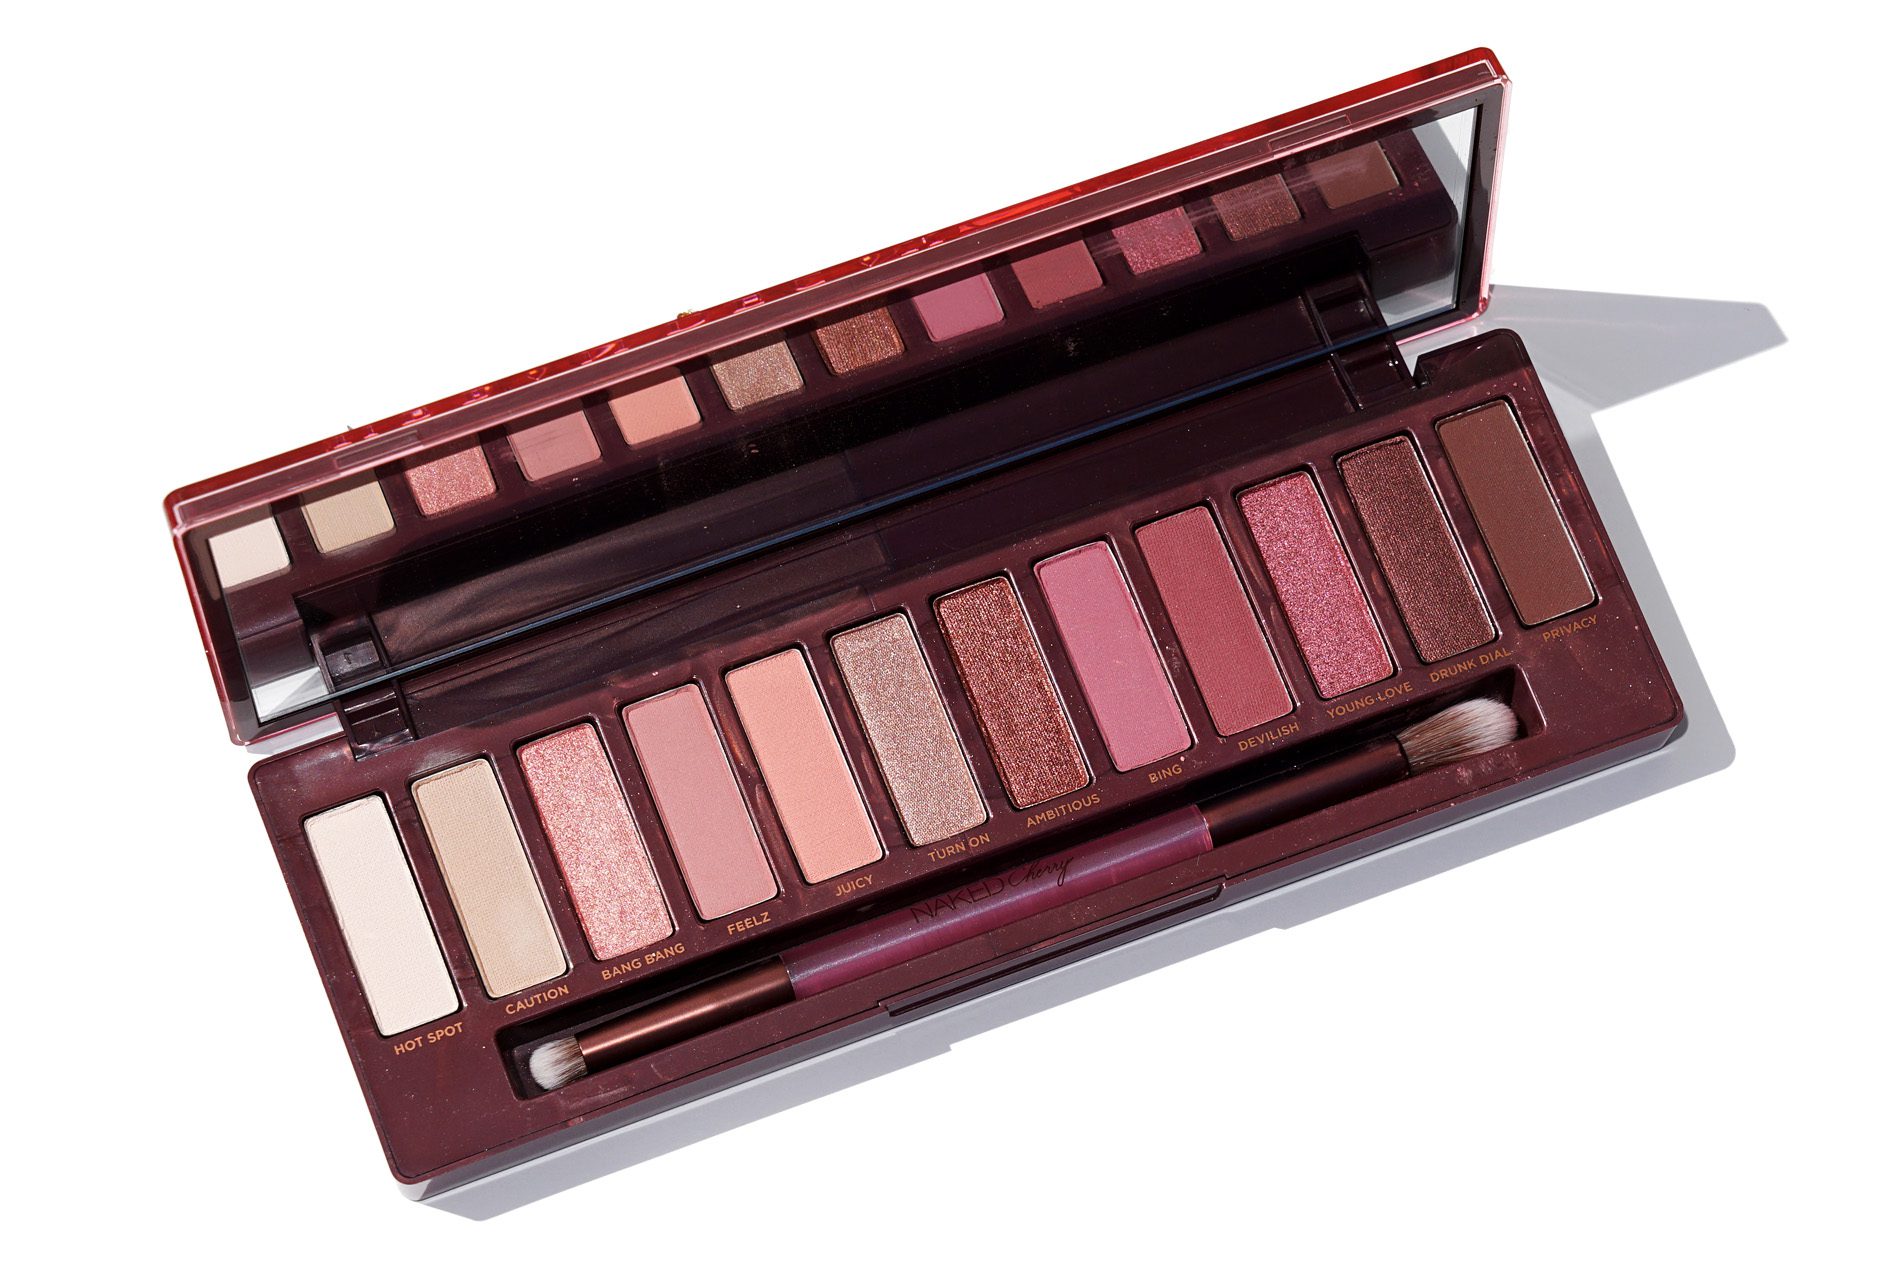 Urban Decay Archives - The Beauty Look Book